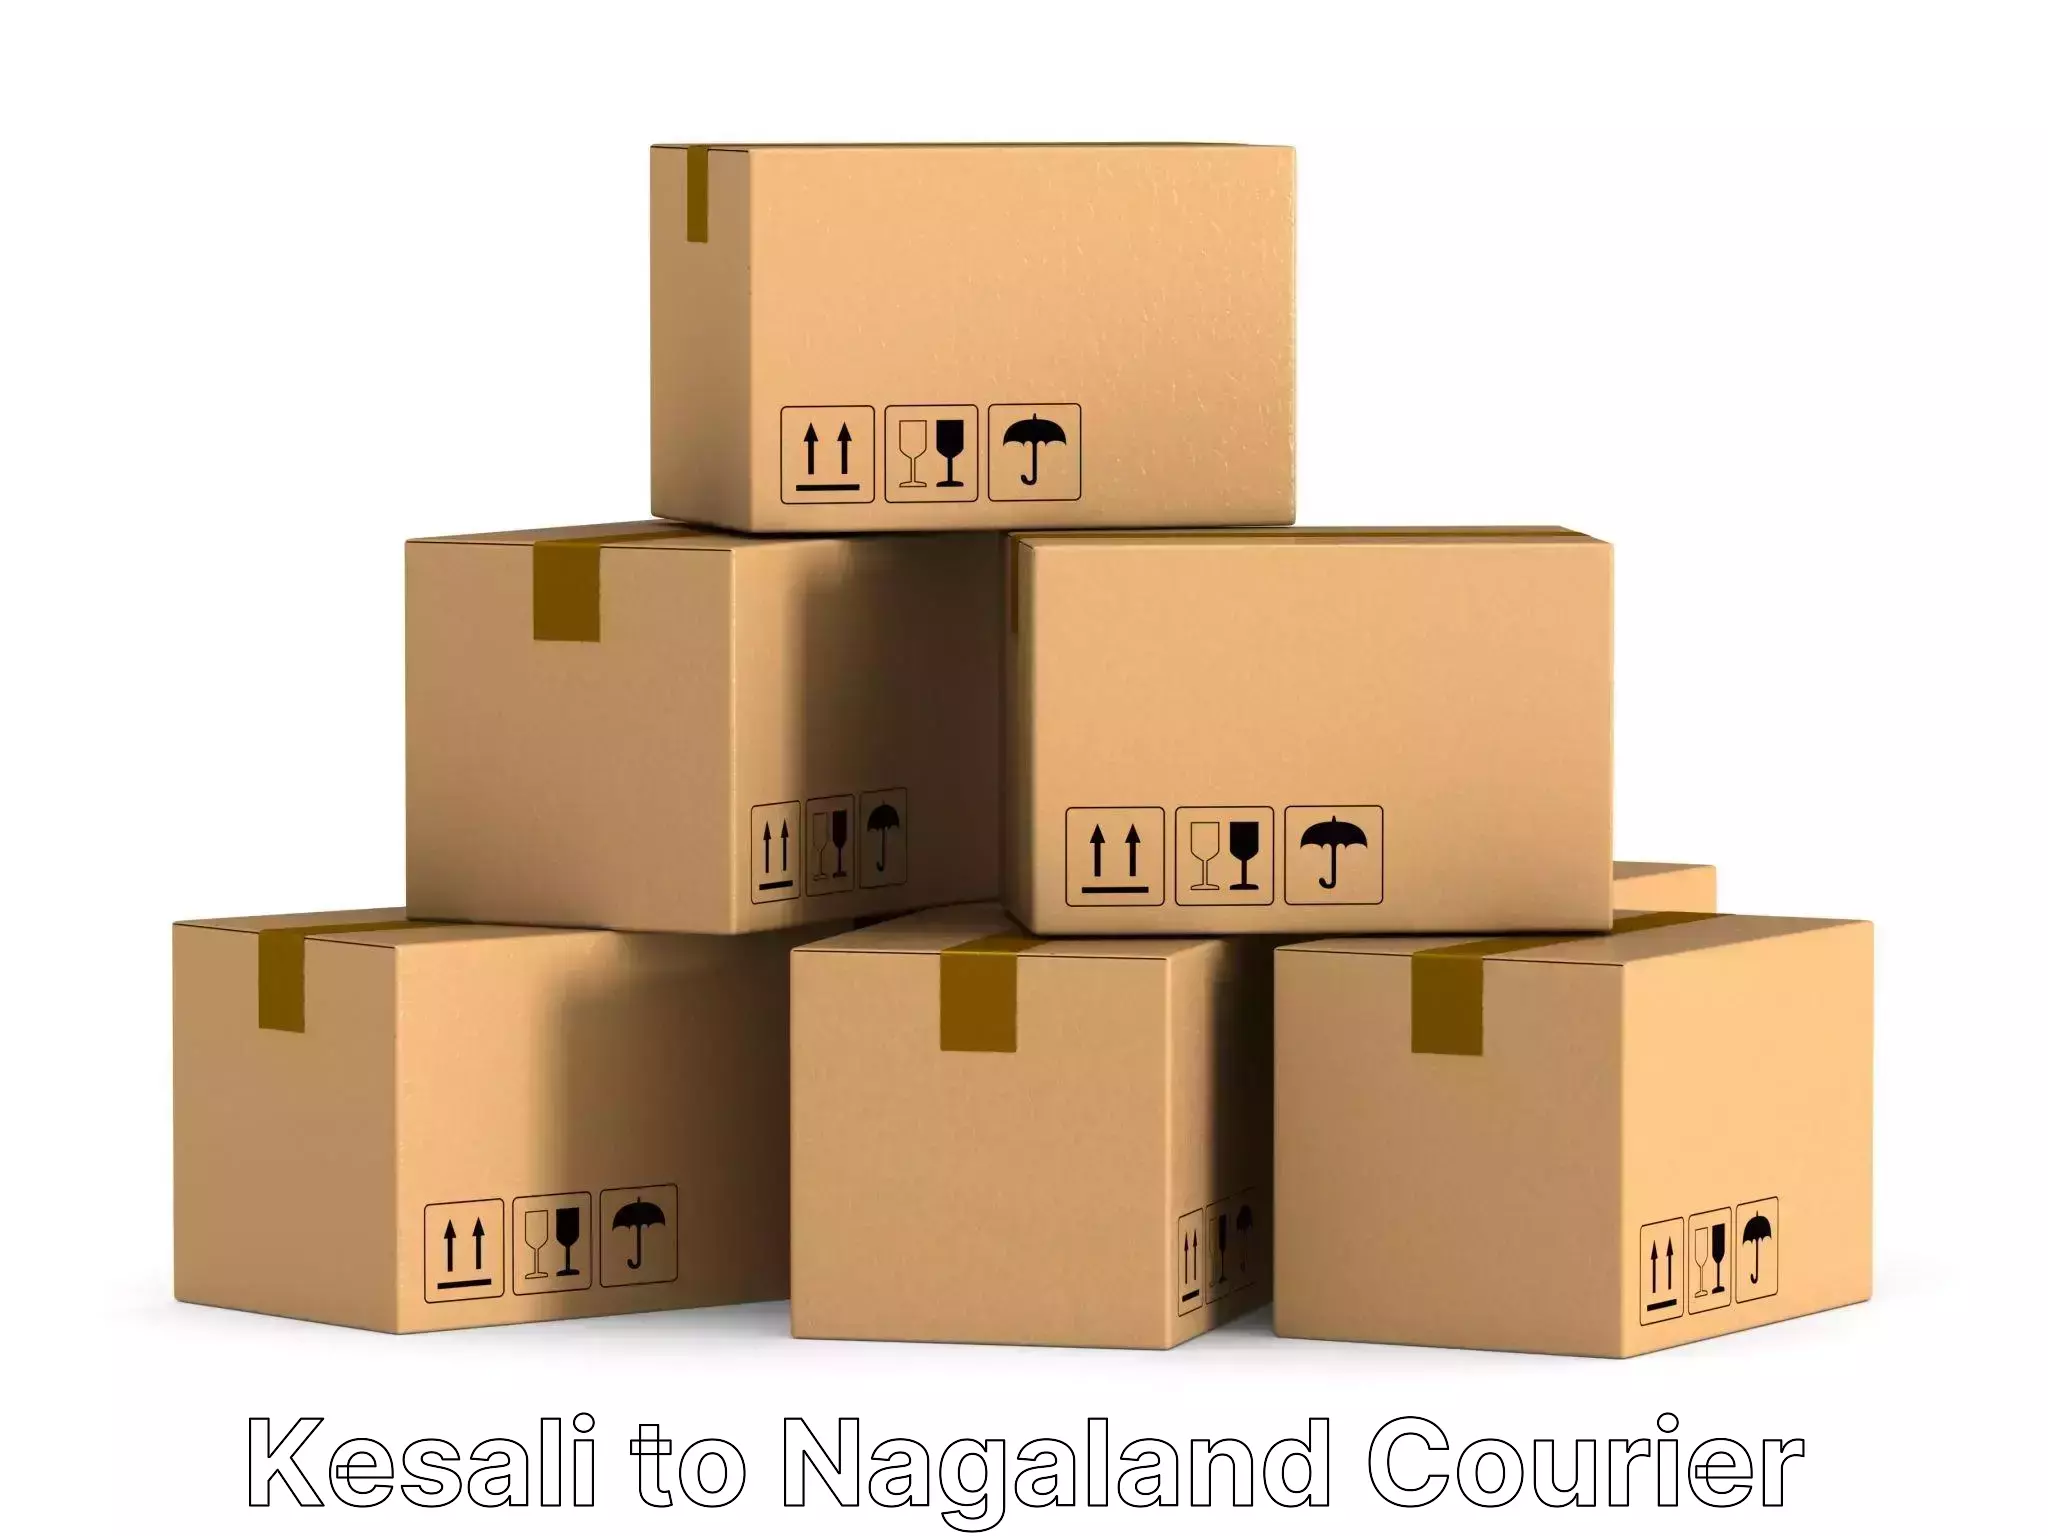 Furniture delivery service Kesali to Nagaland